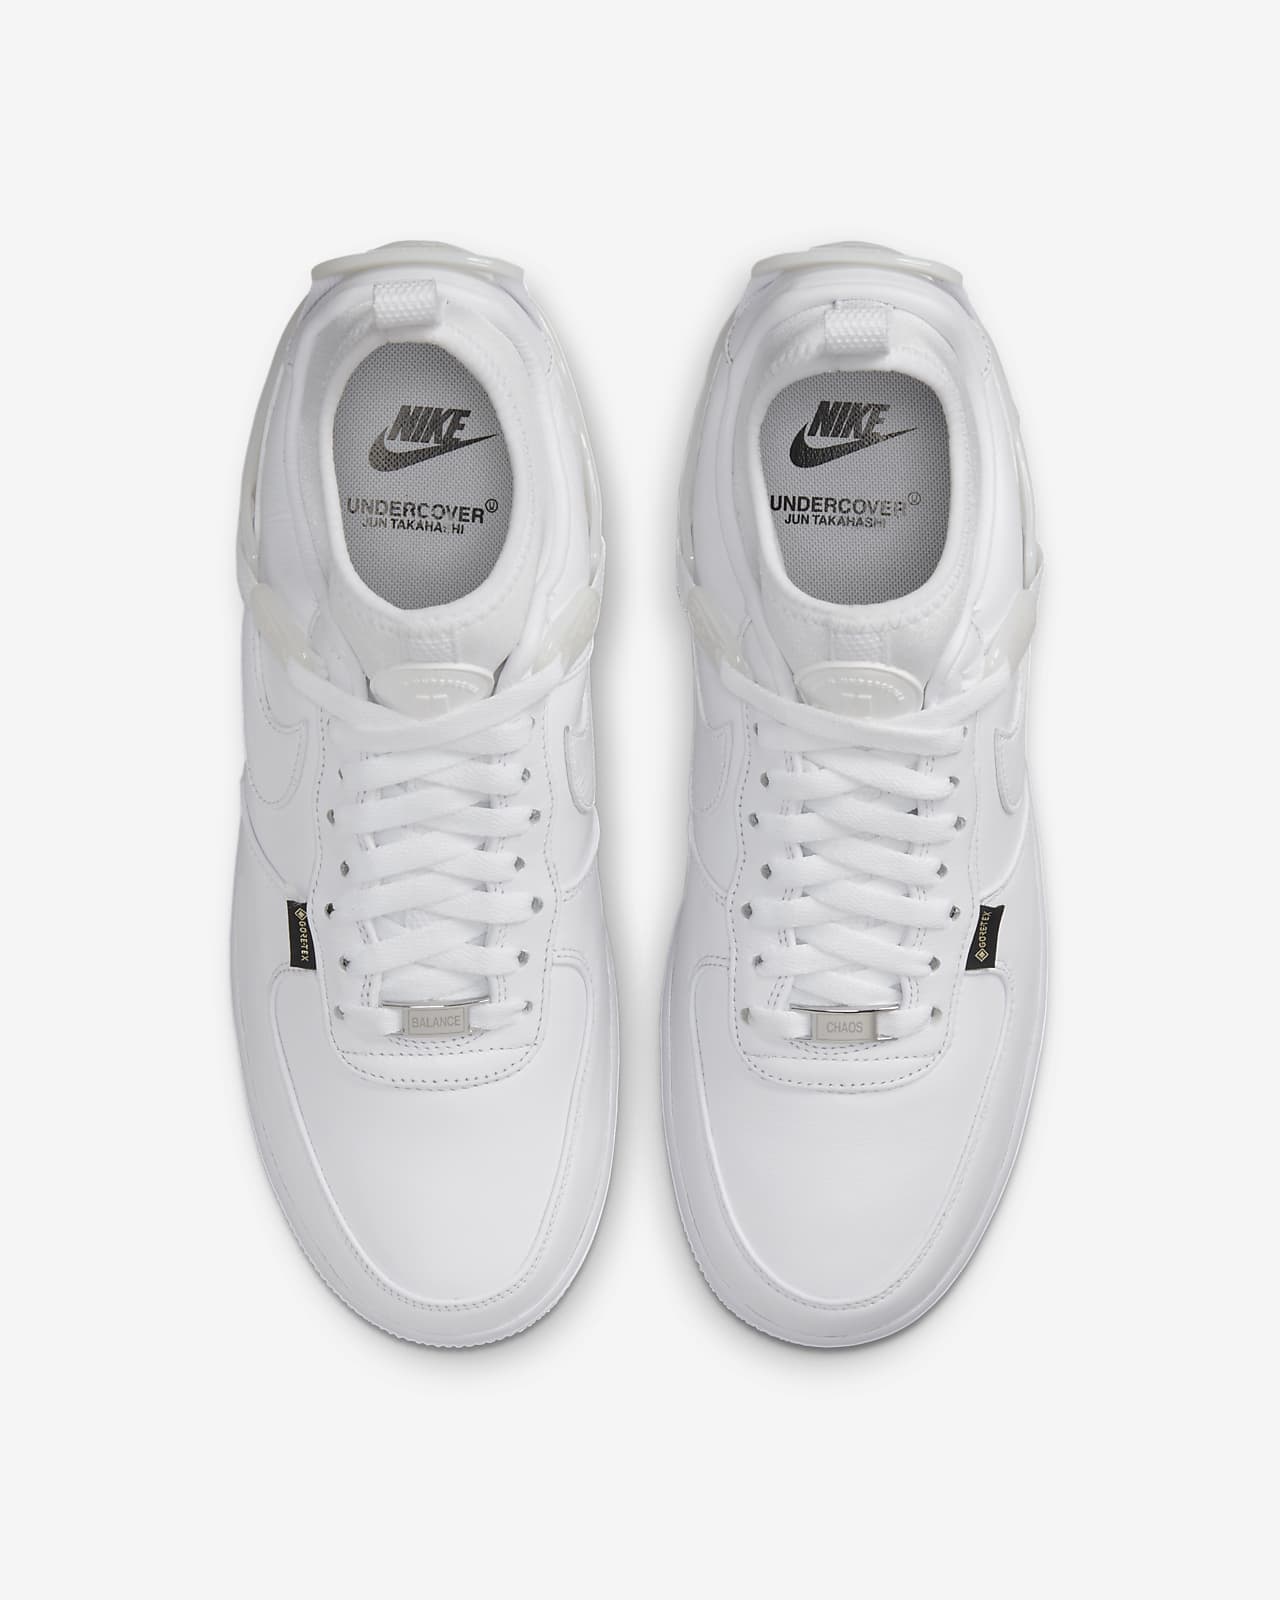 Thermisch Twisted patroon Nike Air Force 1 Low SP x UNDERCOVER Men's Shoes. Nike.com